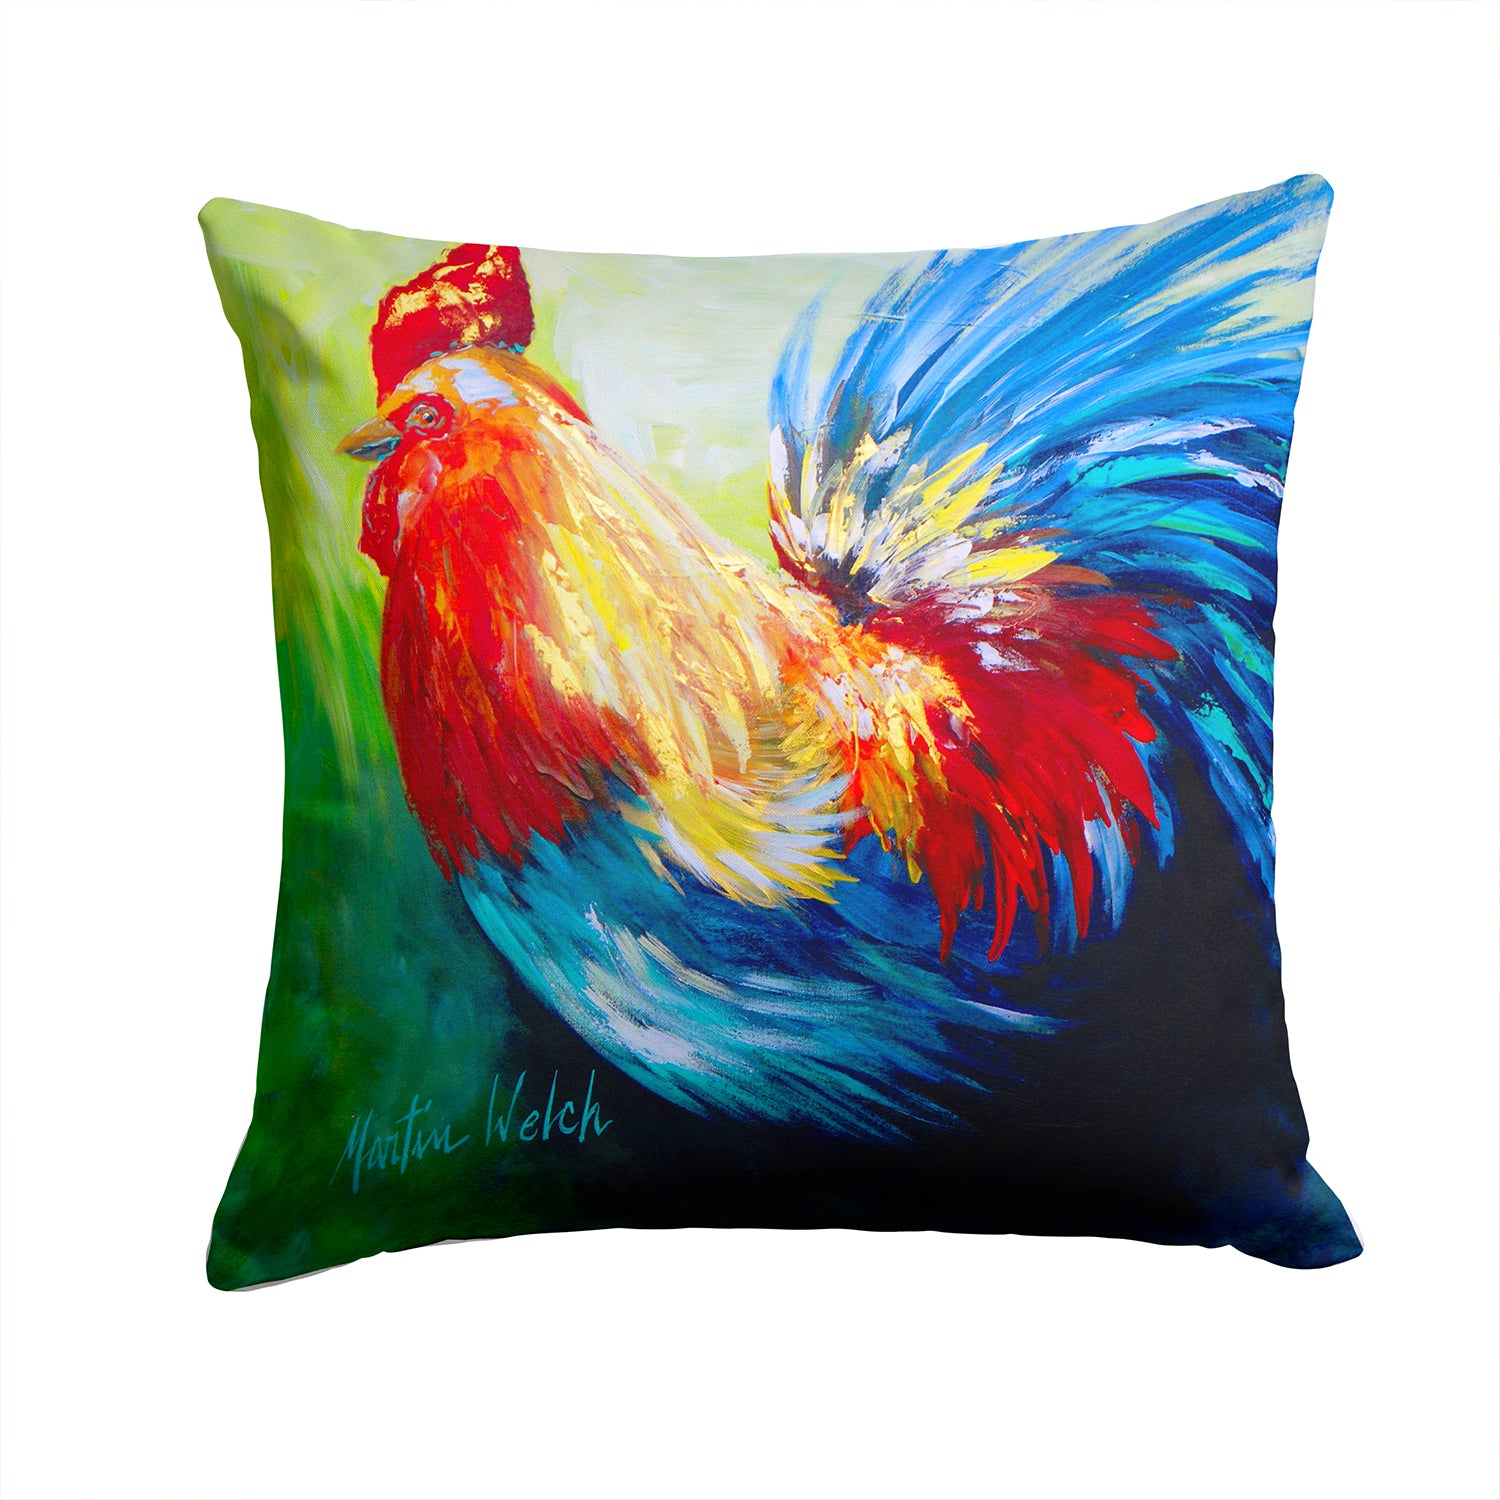 Buy this Rooster Chief Big Feathers Fabric Decorative Pillow